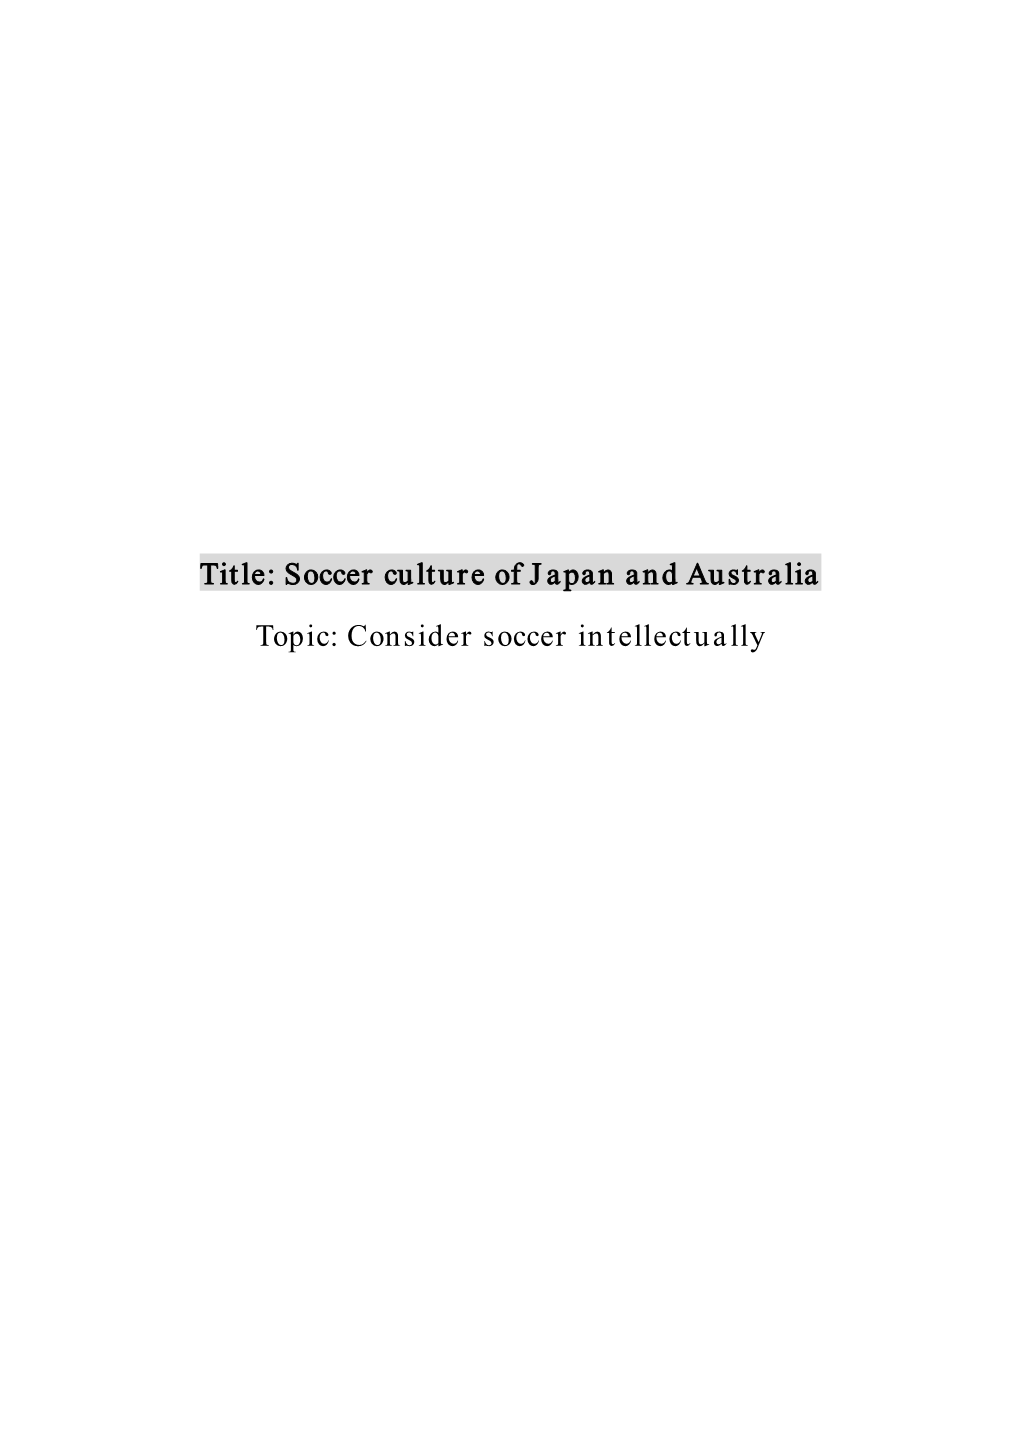 Title: Soccer Culture of Japan and Australia Topic: Consider Soccer Intellectually